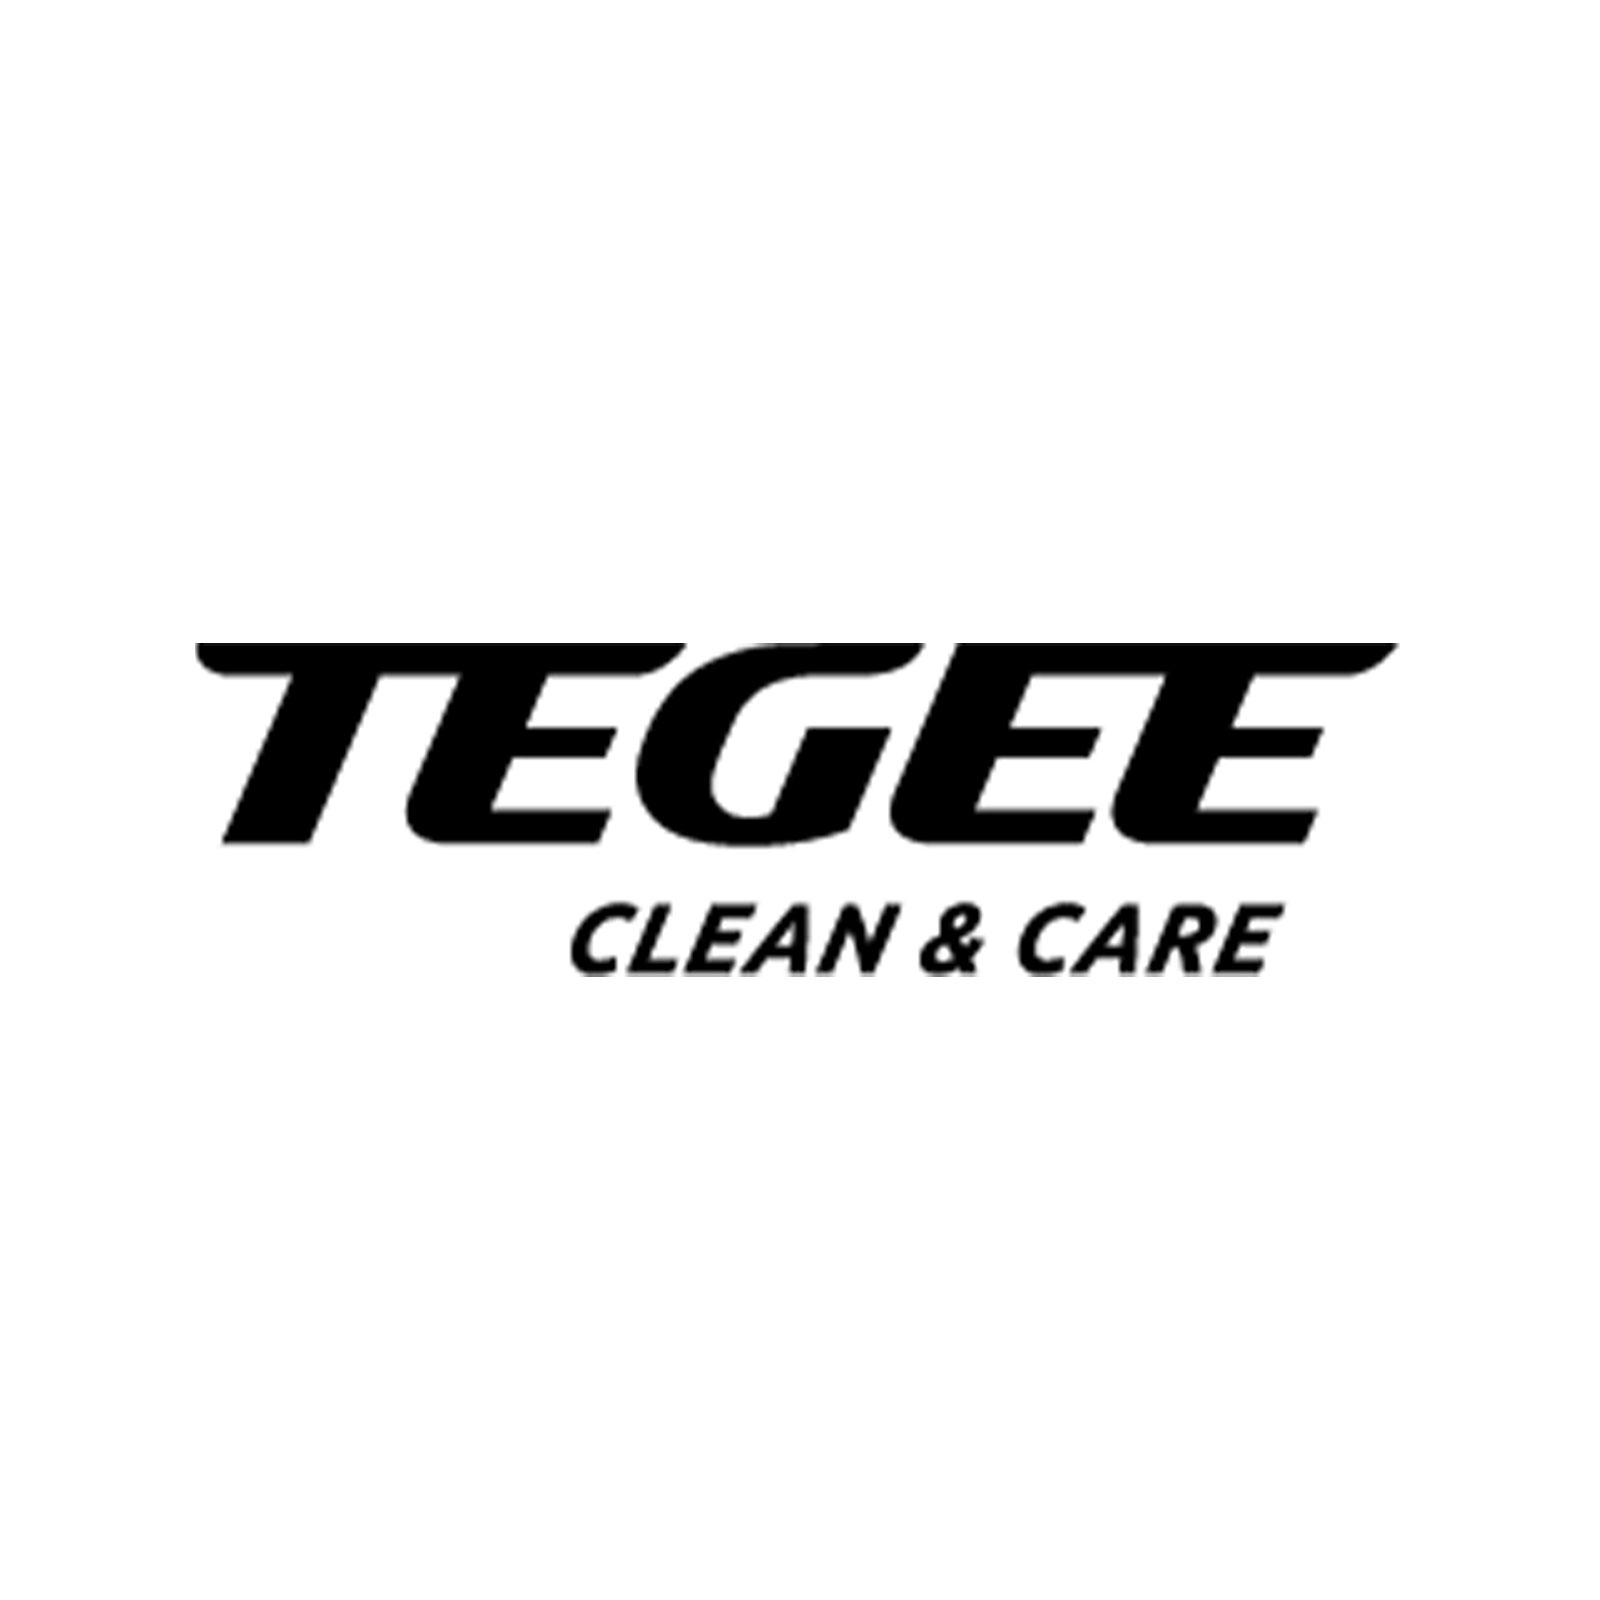 Tegee Clean&Care